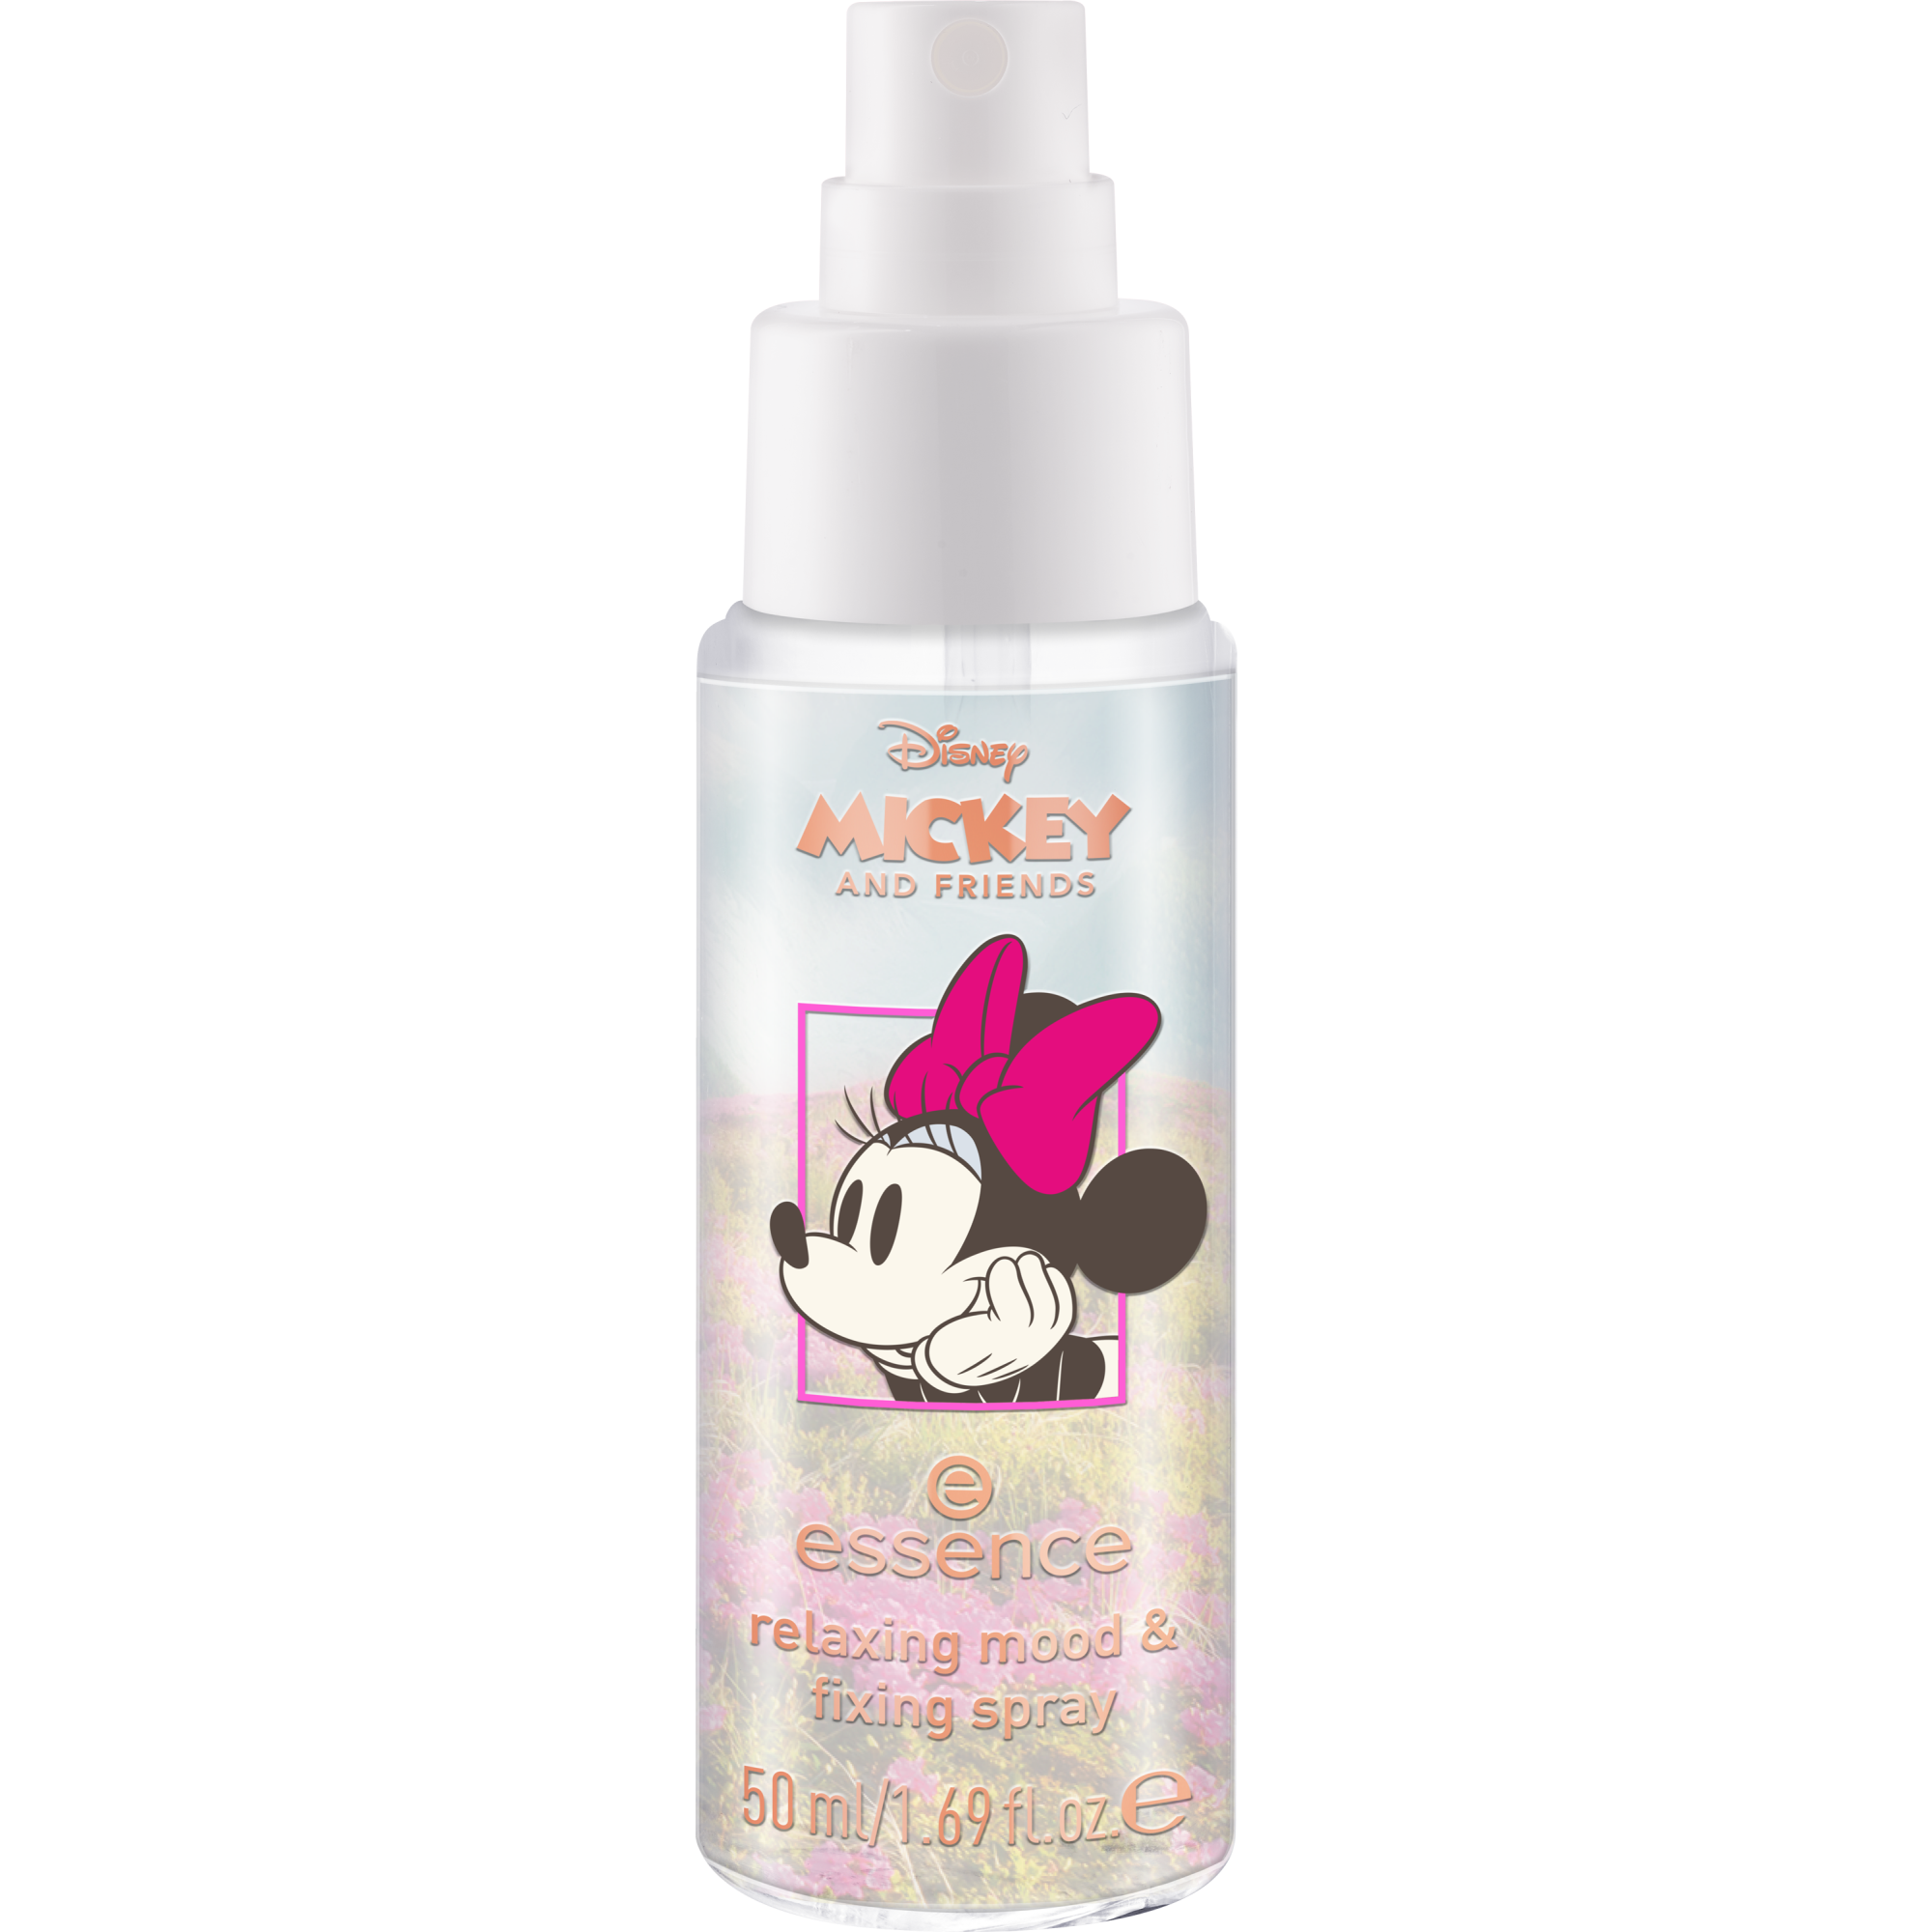 Disney Mickey and Friends relaxing mood & fixing spray spray fixateur